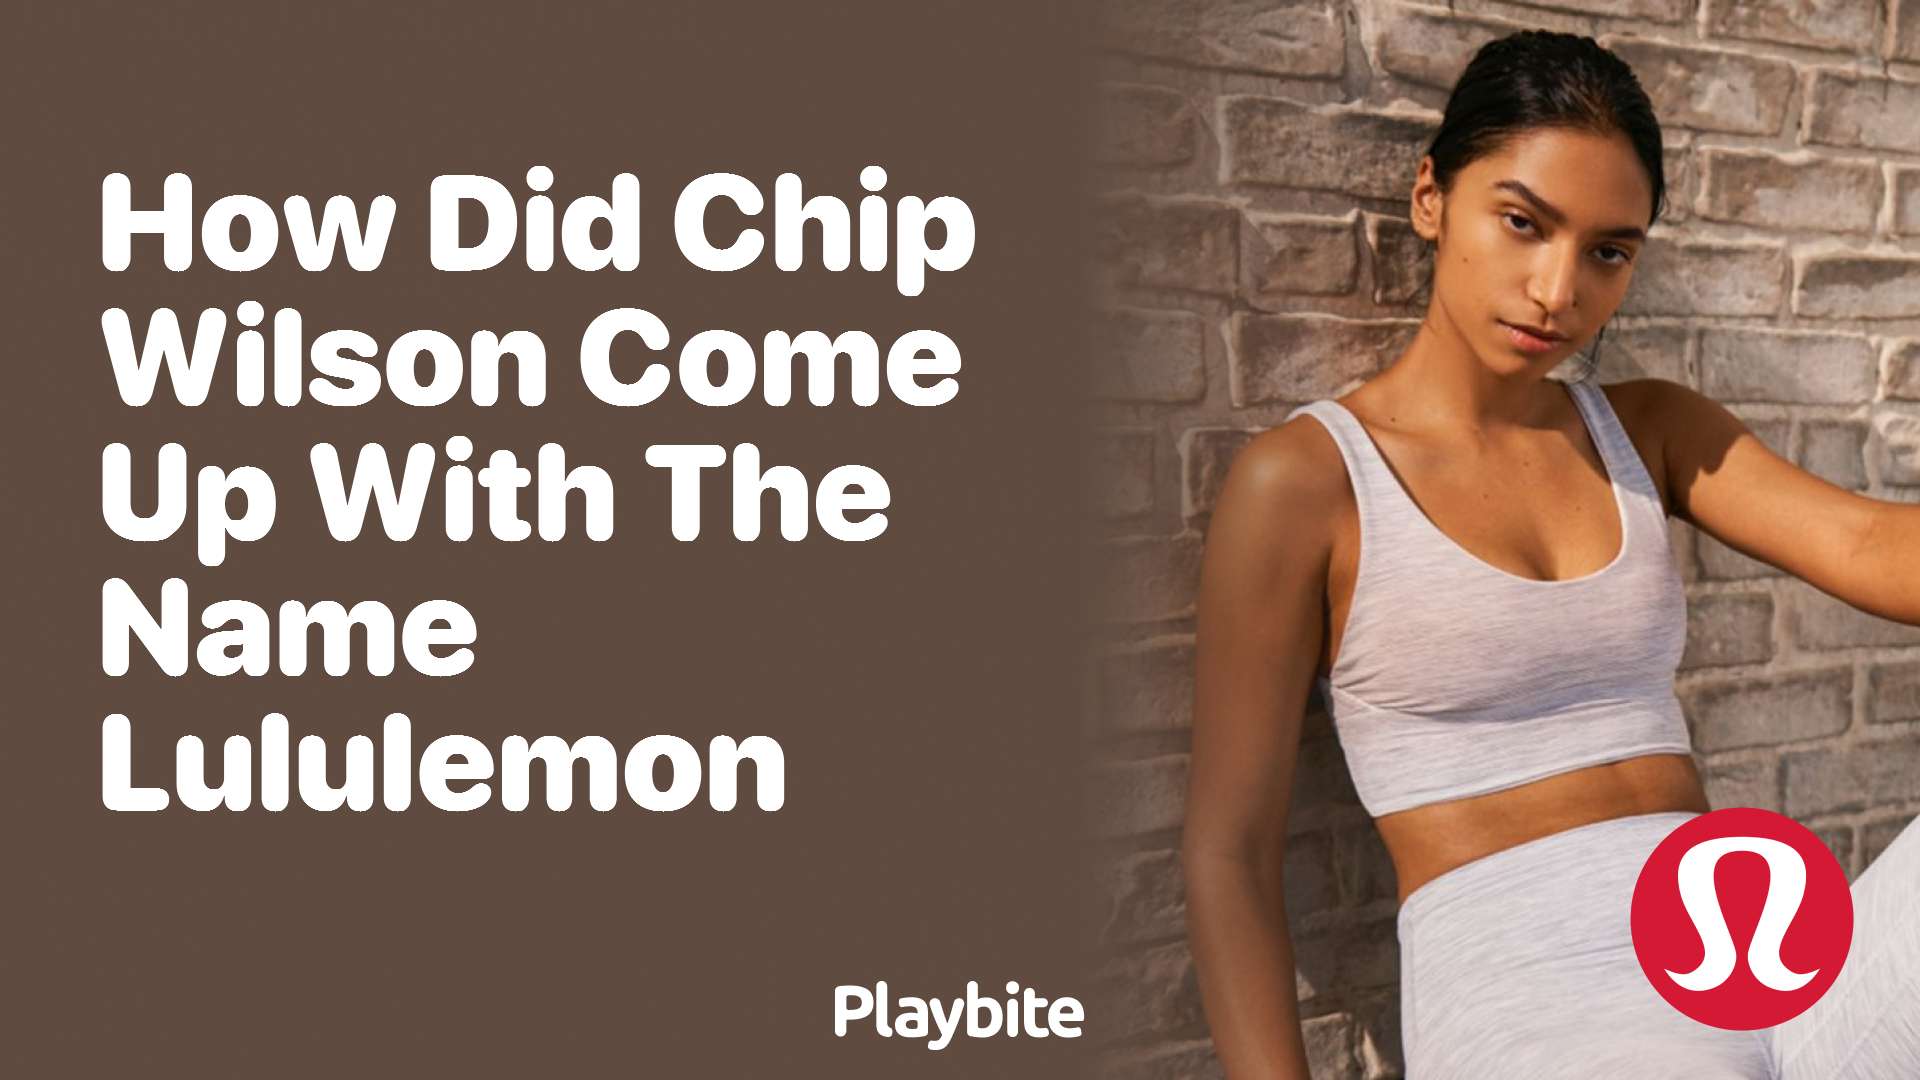 How did Chip Wilson come up with the name Lululemon? - Playbite